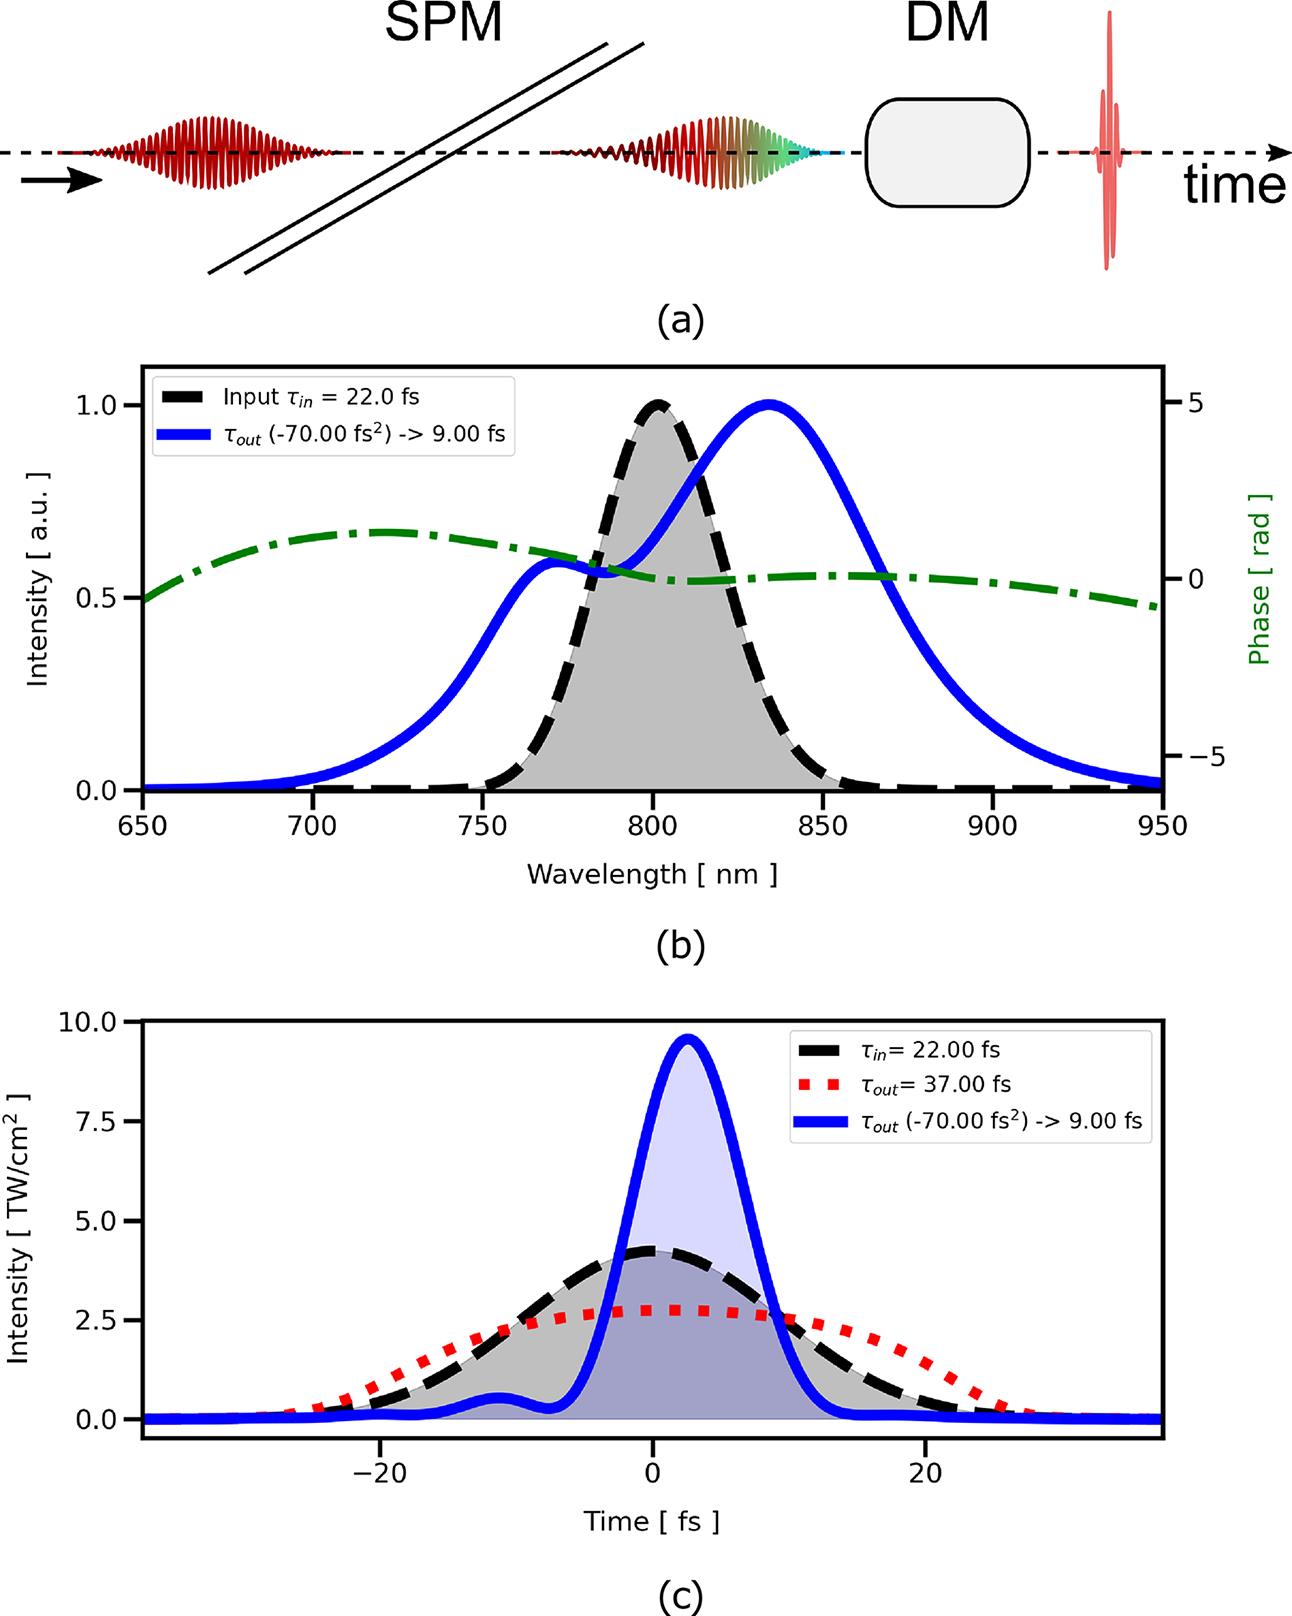 (a) Concept of post-compression with the thin-film compressor (TFC) with spectral broadening occurring due to self-phase modulation (SPM) within the thin films followed by re-compression on the resulting chirped pulse through appropriate dispersion management (DM). (b) Pulse spectra starting from a 14 J pulse initially at 22 fs duration (gray) compared with the subsequent spectrally broadened spectrum (blue) that supports a 9-fs pulse duration after DM that provides compensation for the group delay dispersion of –70 fs2 (green). (c) Pulse average intensity across the beam profile for the original input pulse (gray), the chirped pulse that exits the thin films (red dotted), and the compensated pulse (blue).